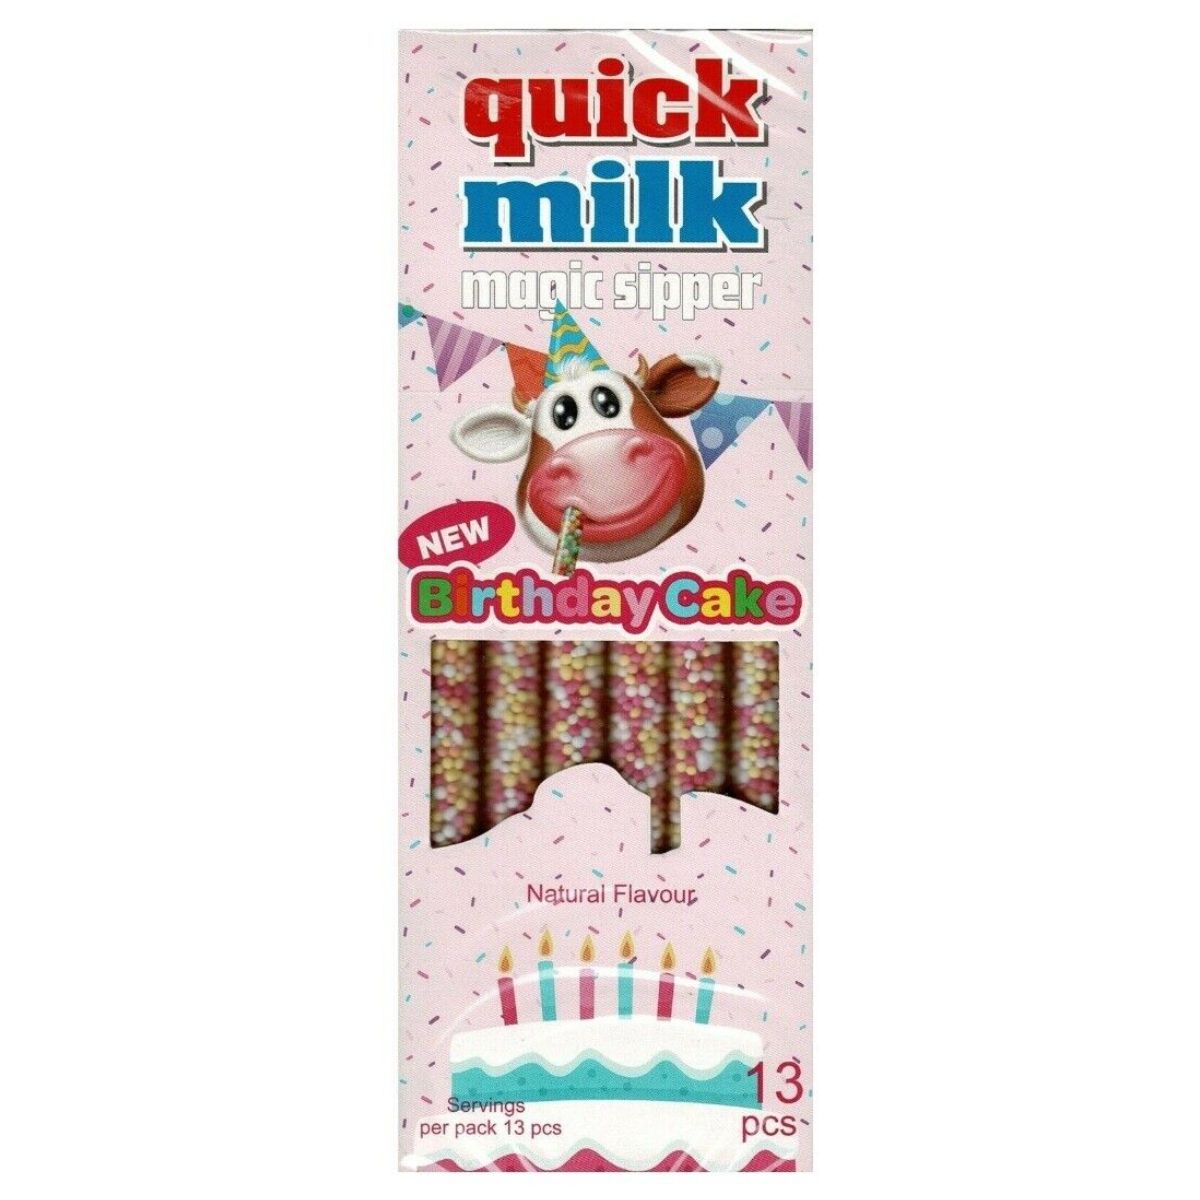 A product package of Quick Milk - Magic Sipper - 78g with birthday cake flavor, decorated with an image of a cartoon cow wearing a party hat.